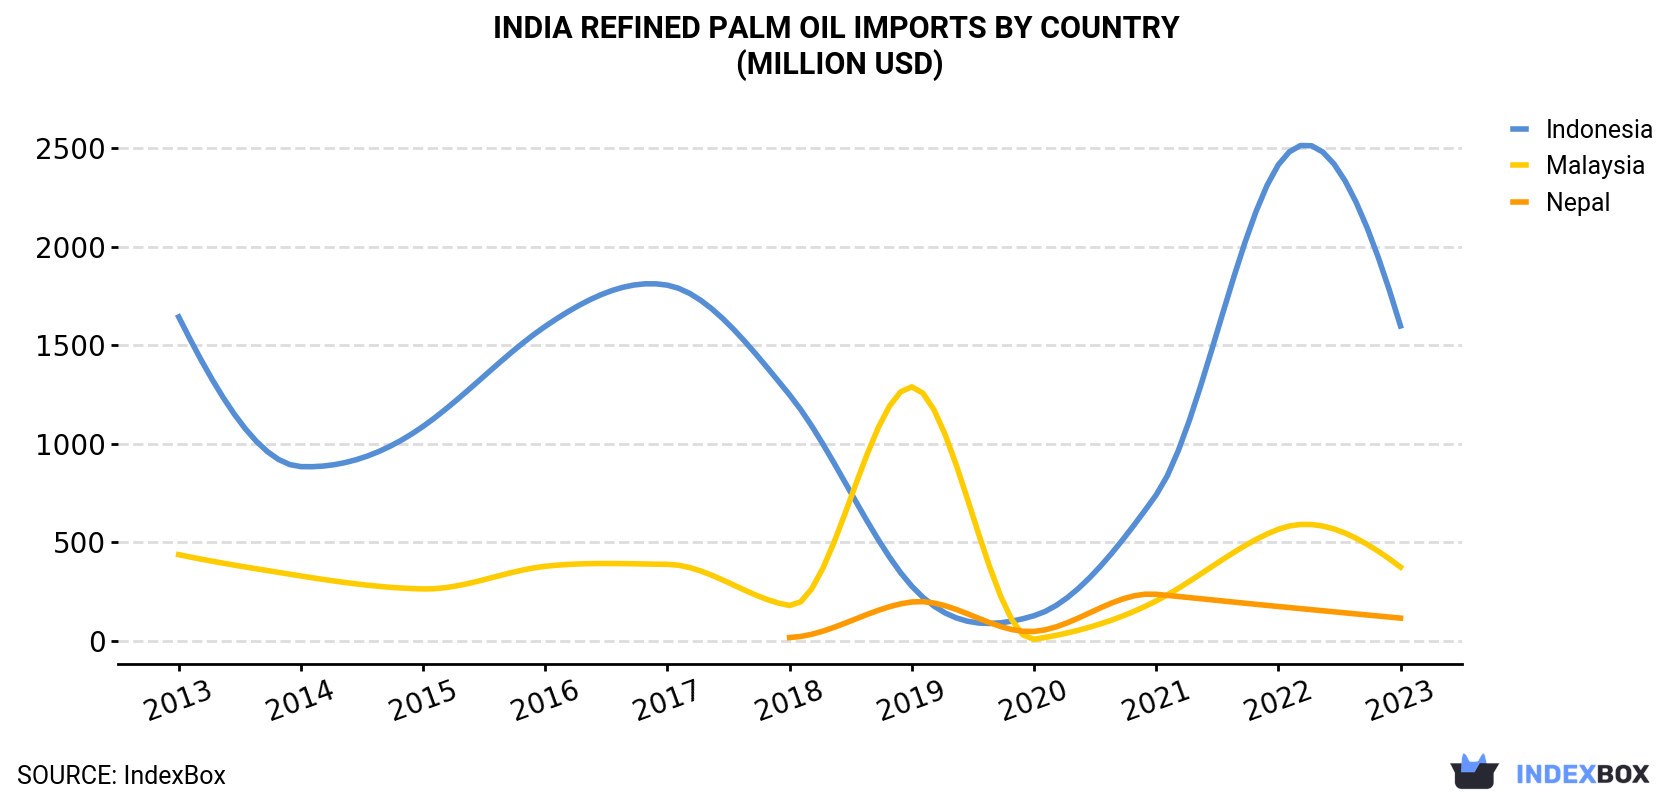 India Refined Palm Oil Imports By Country (Million USD)